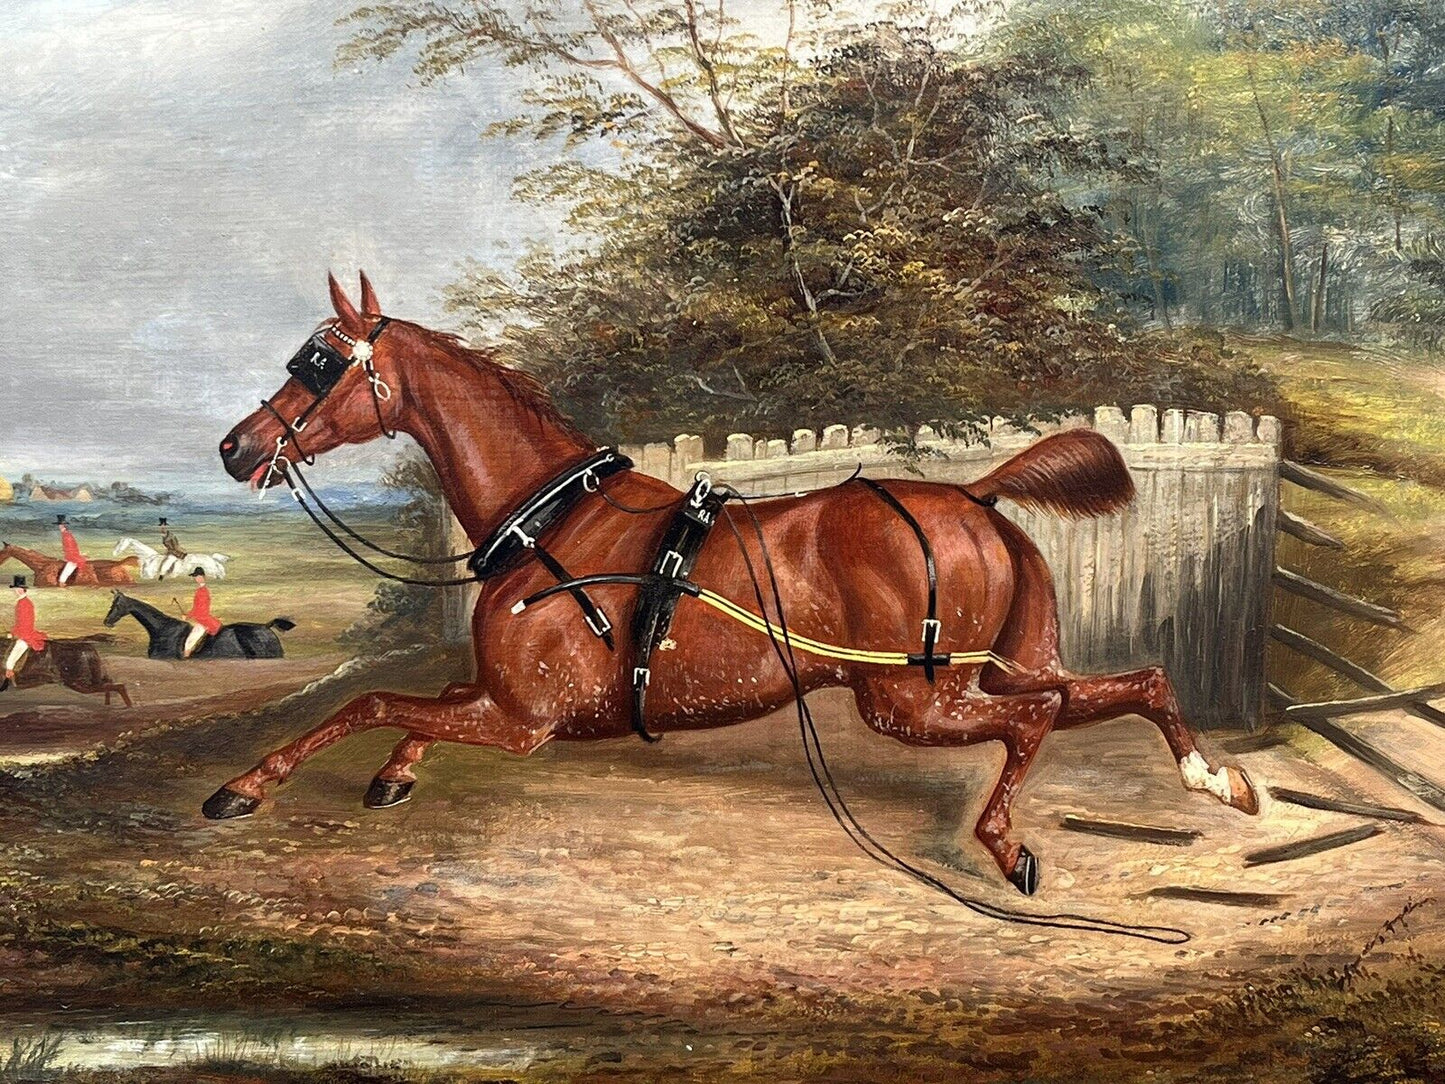 Equestrian Painting “Bolting For The Hunt”James Clark (British, 1855-1943)